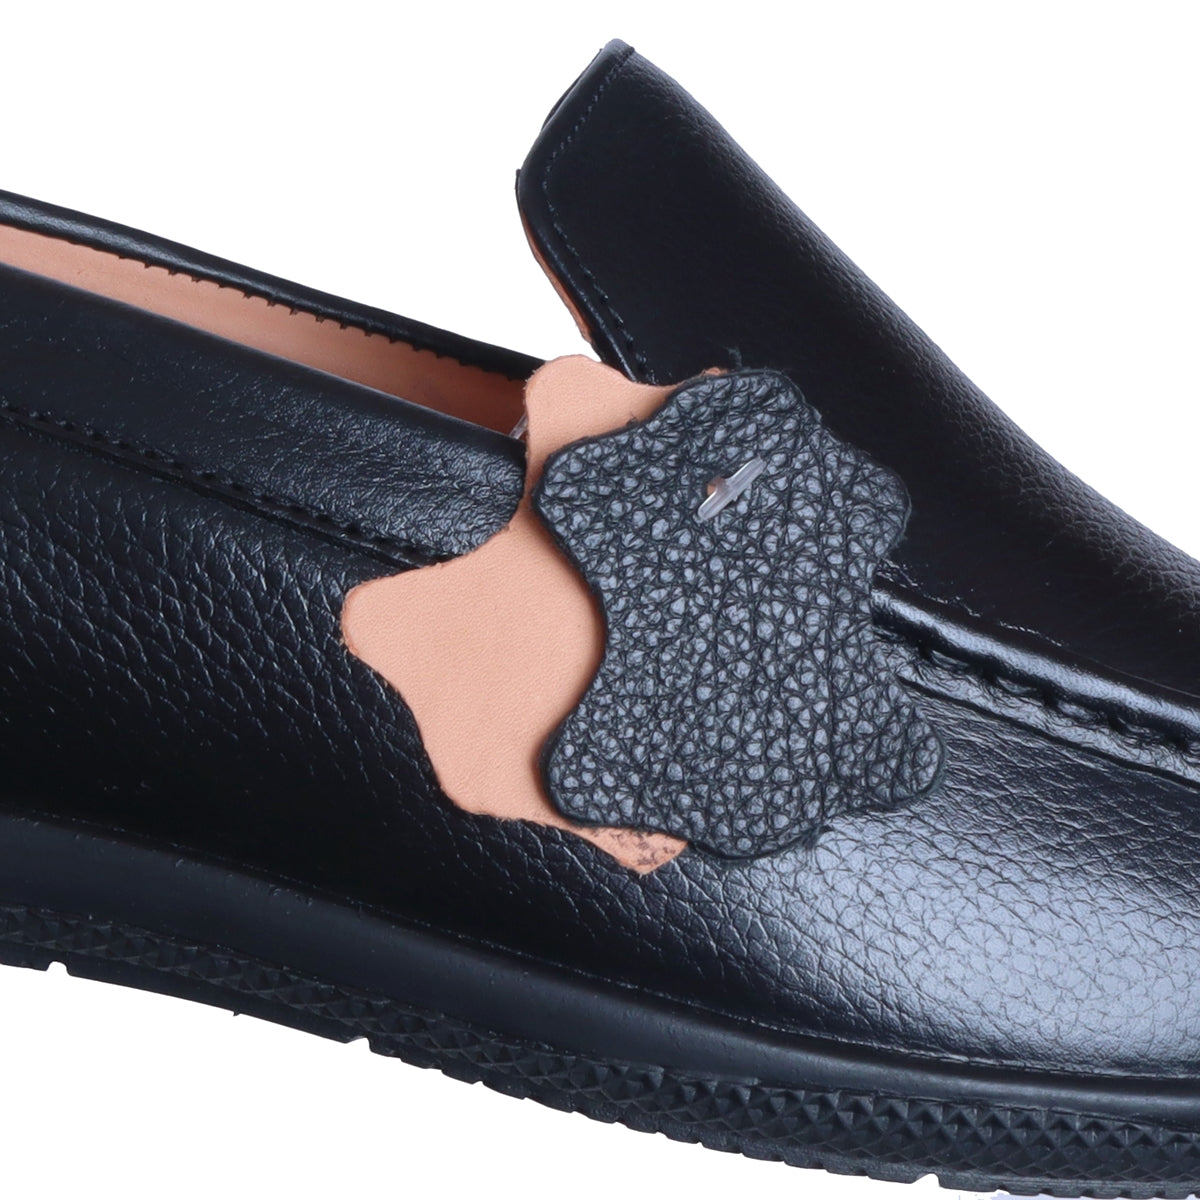 mens brown loafer shoes_ZS11